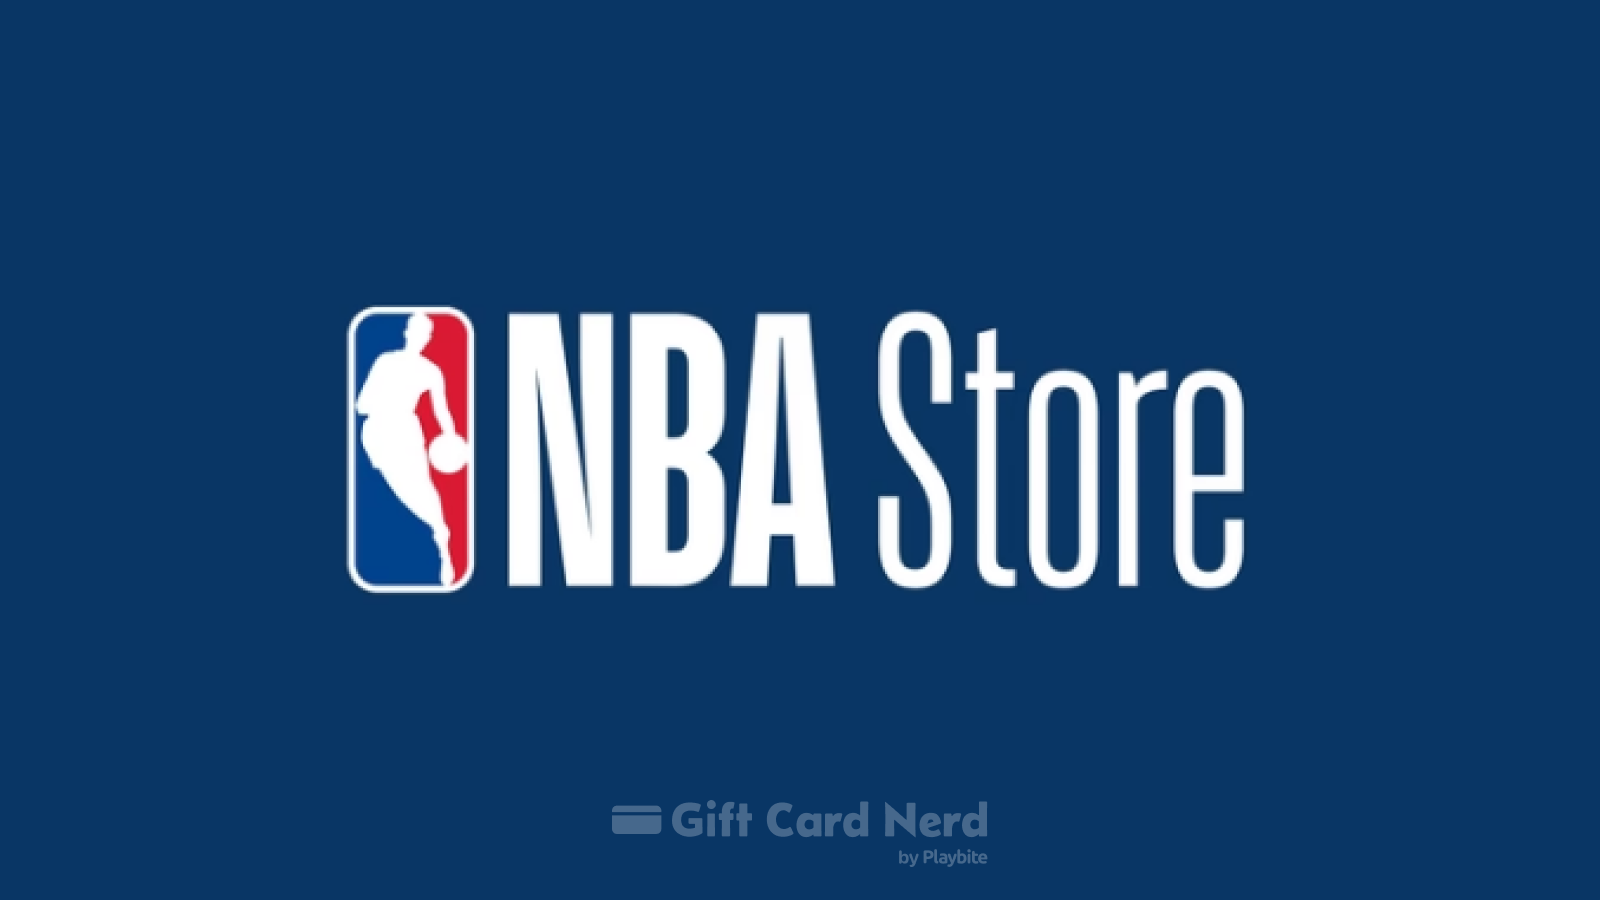 Can I Use an NBA Store Gift Card on Cash App?